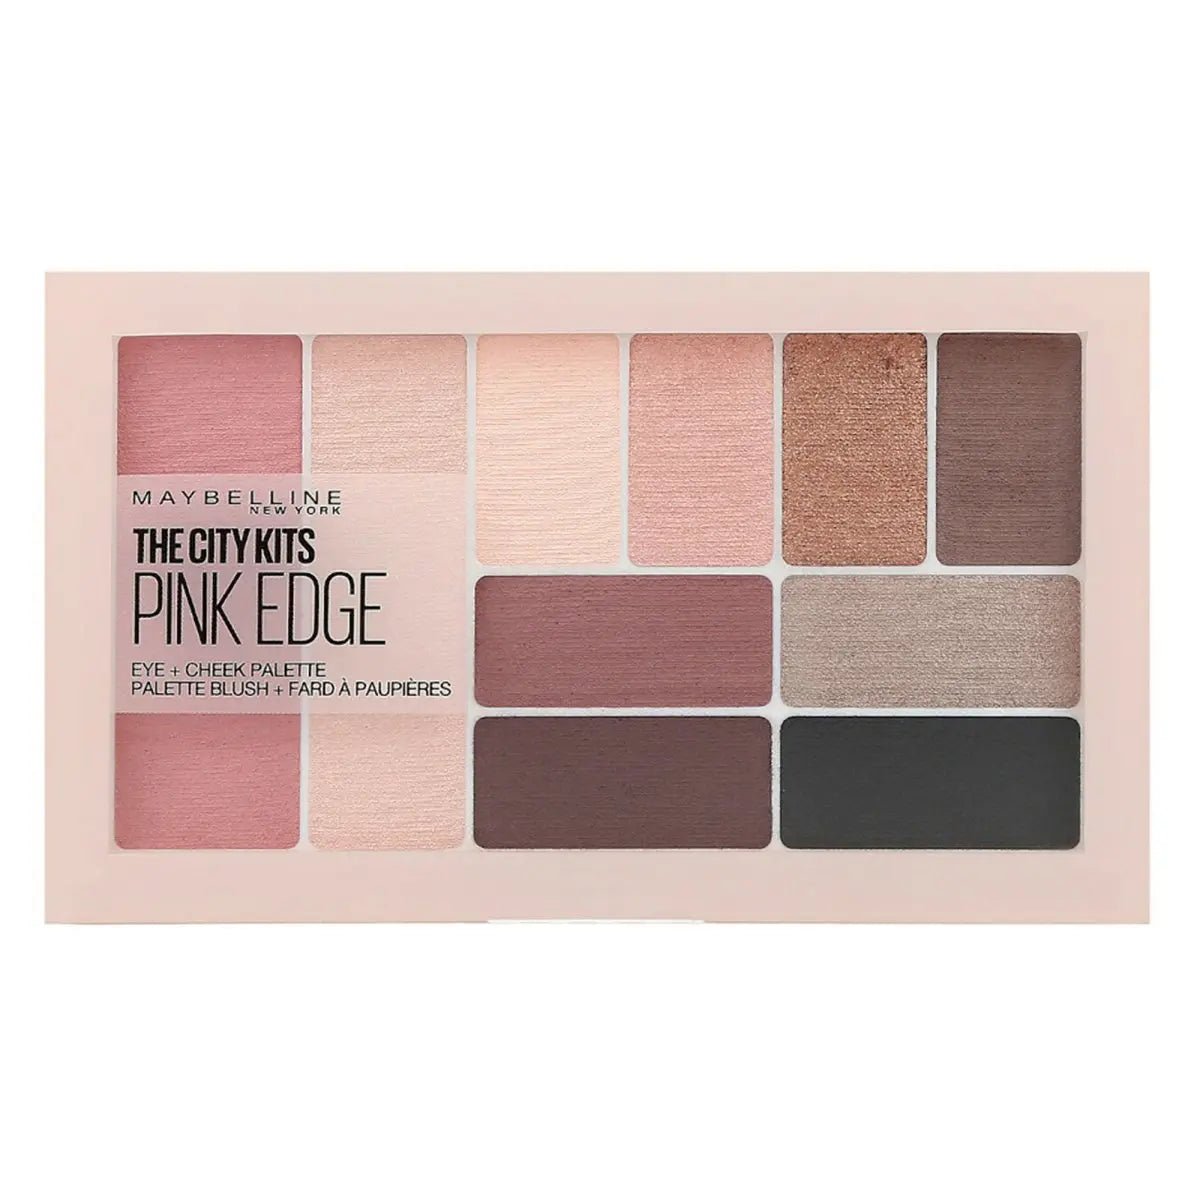 Image of Maybelline Eyeshadow Palette the City Kits Pink Edge